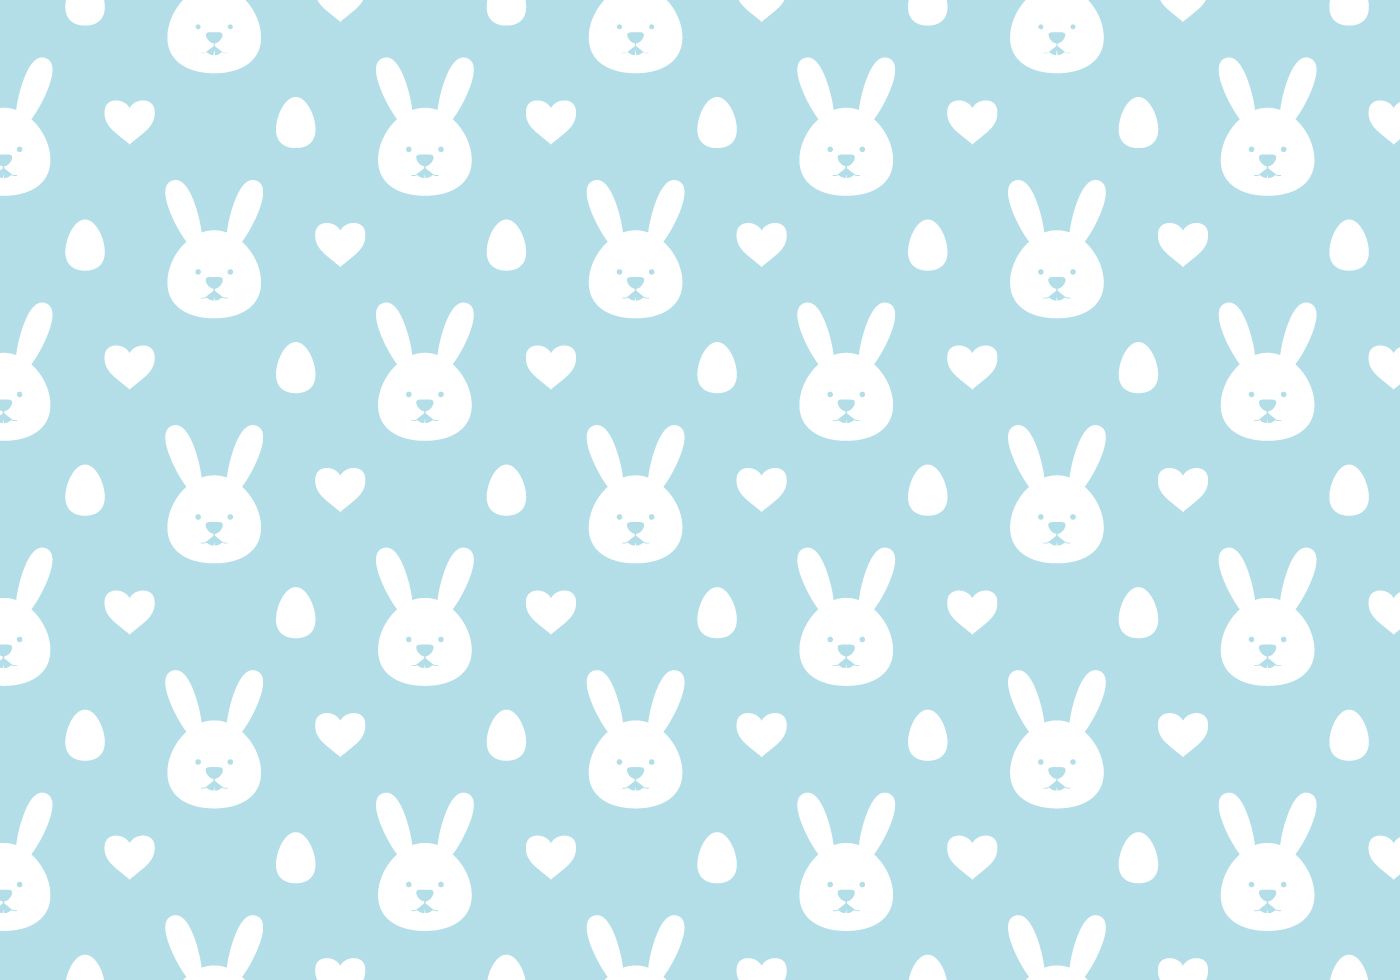 A blue and white patterned Easter wallpaper with bunnies, eggs and hearts. - Easter